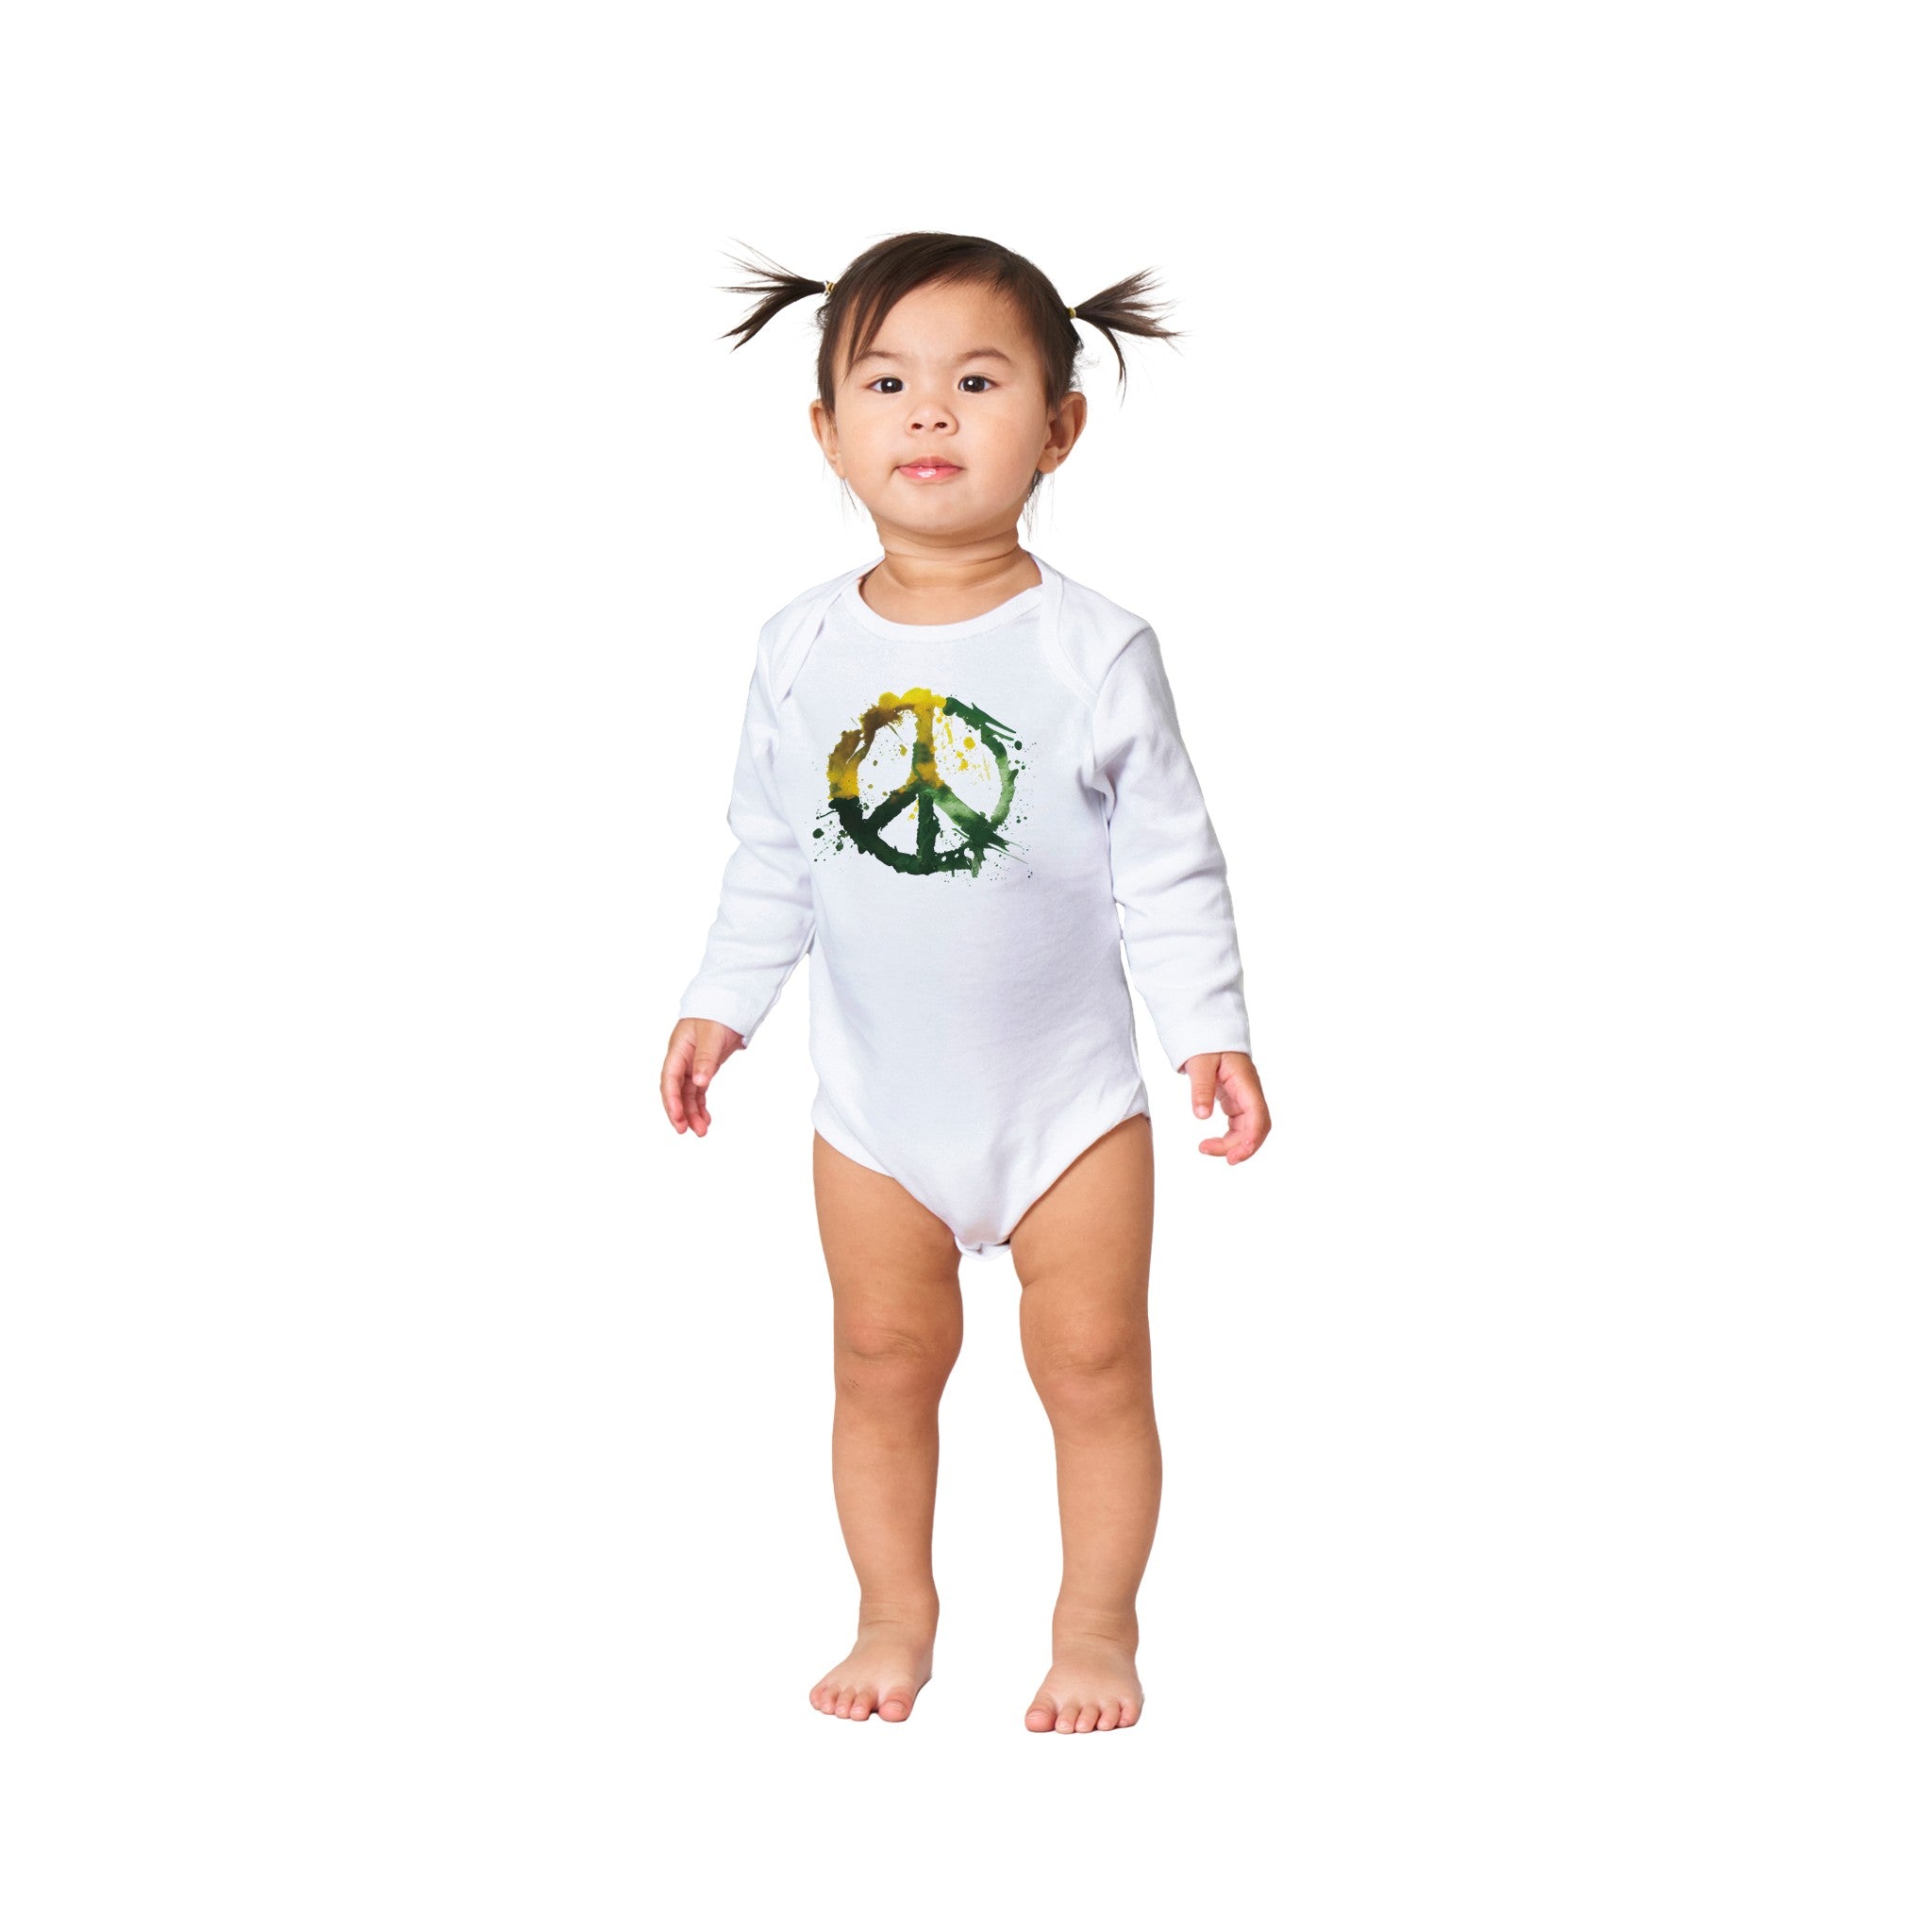 Charming Choices: Long-Sleeved Baby Romper Suit - Peace Baby, SenPets Original